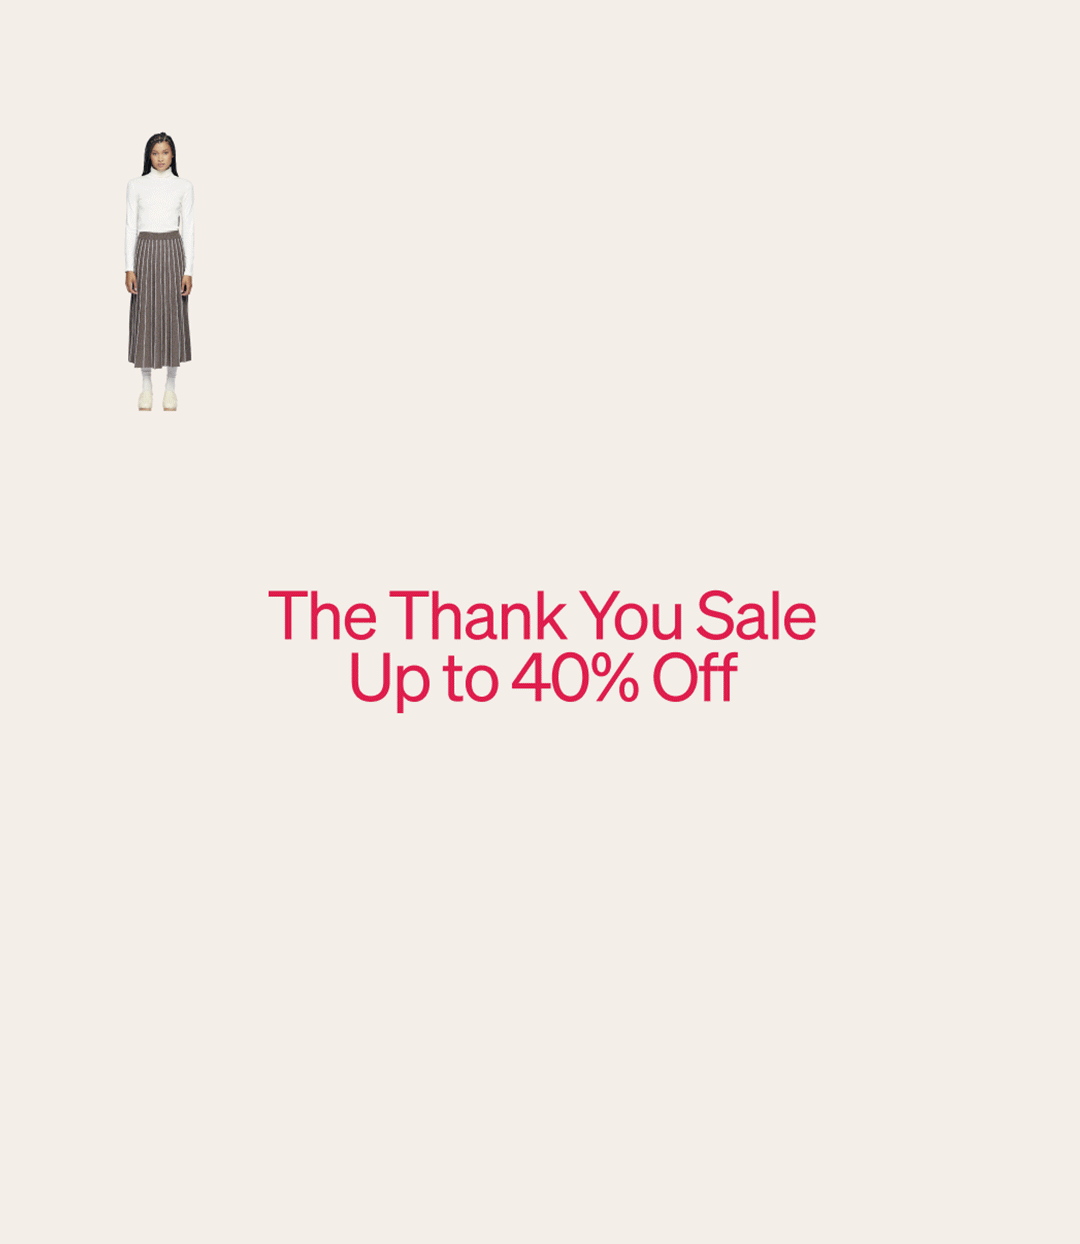 The Thank You Sale Up to 40% Off